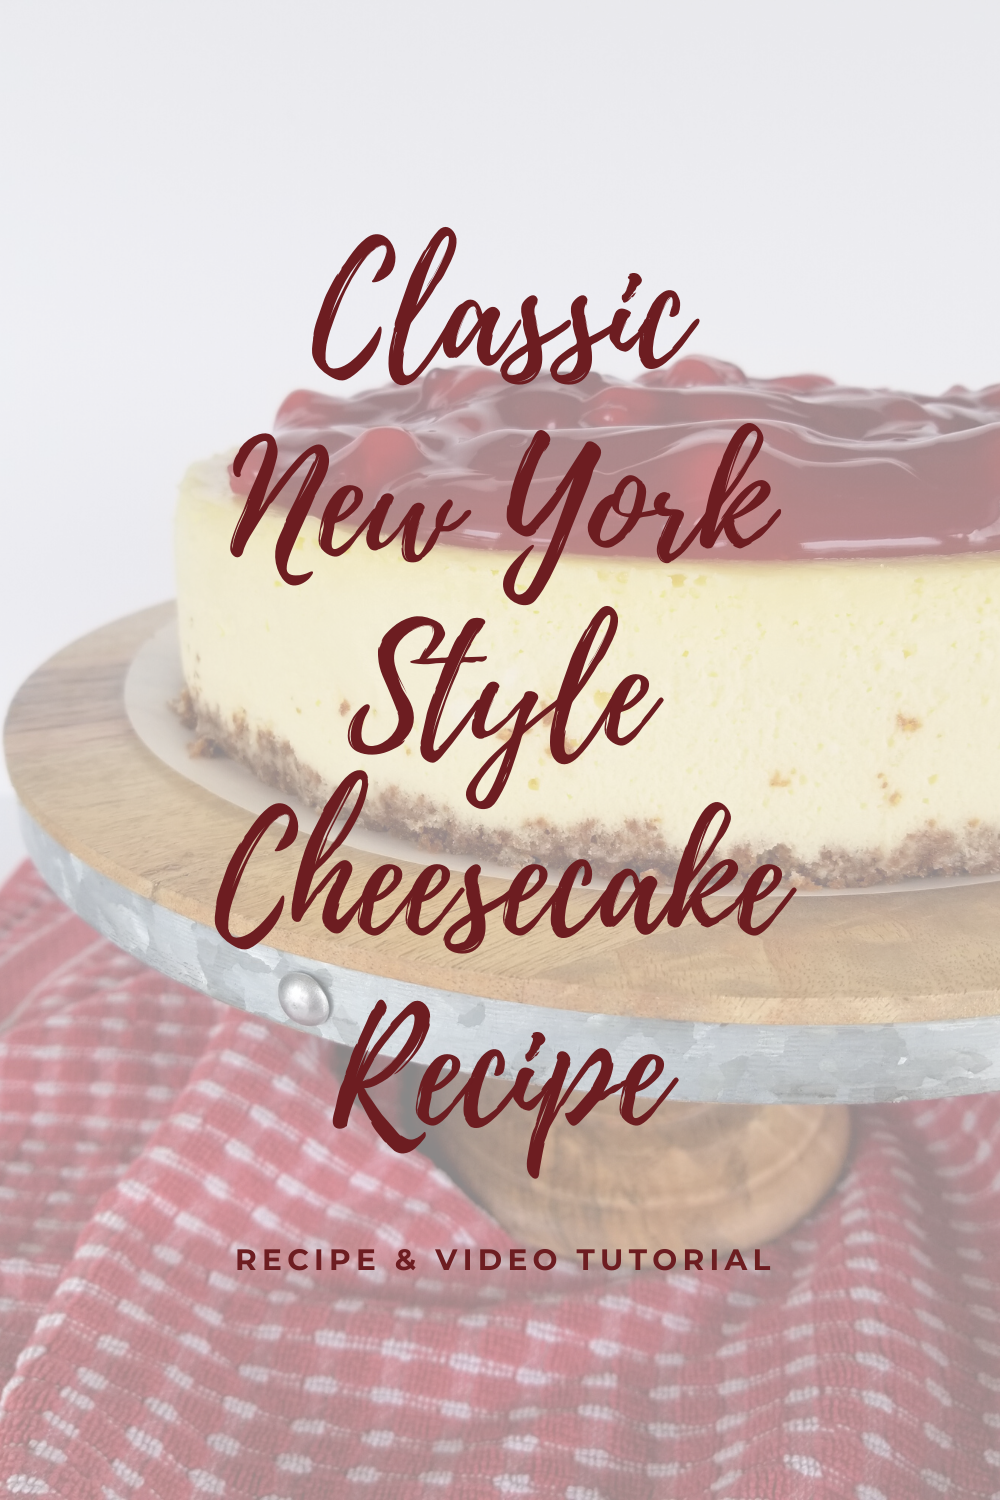 Recipe and Video Tutorial to make your very own Classic New York Style Cheesecake at home!